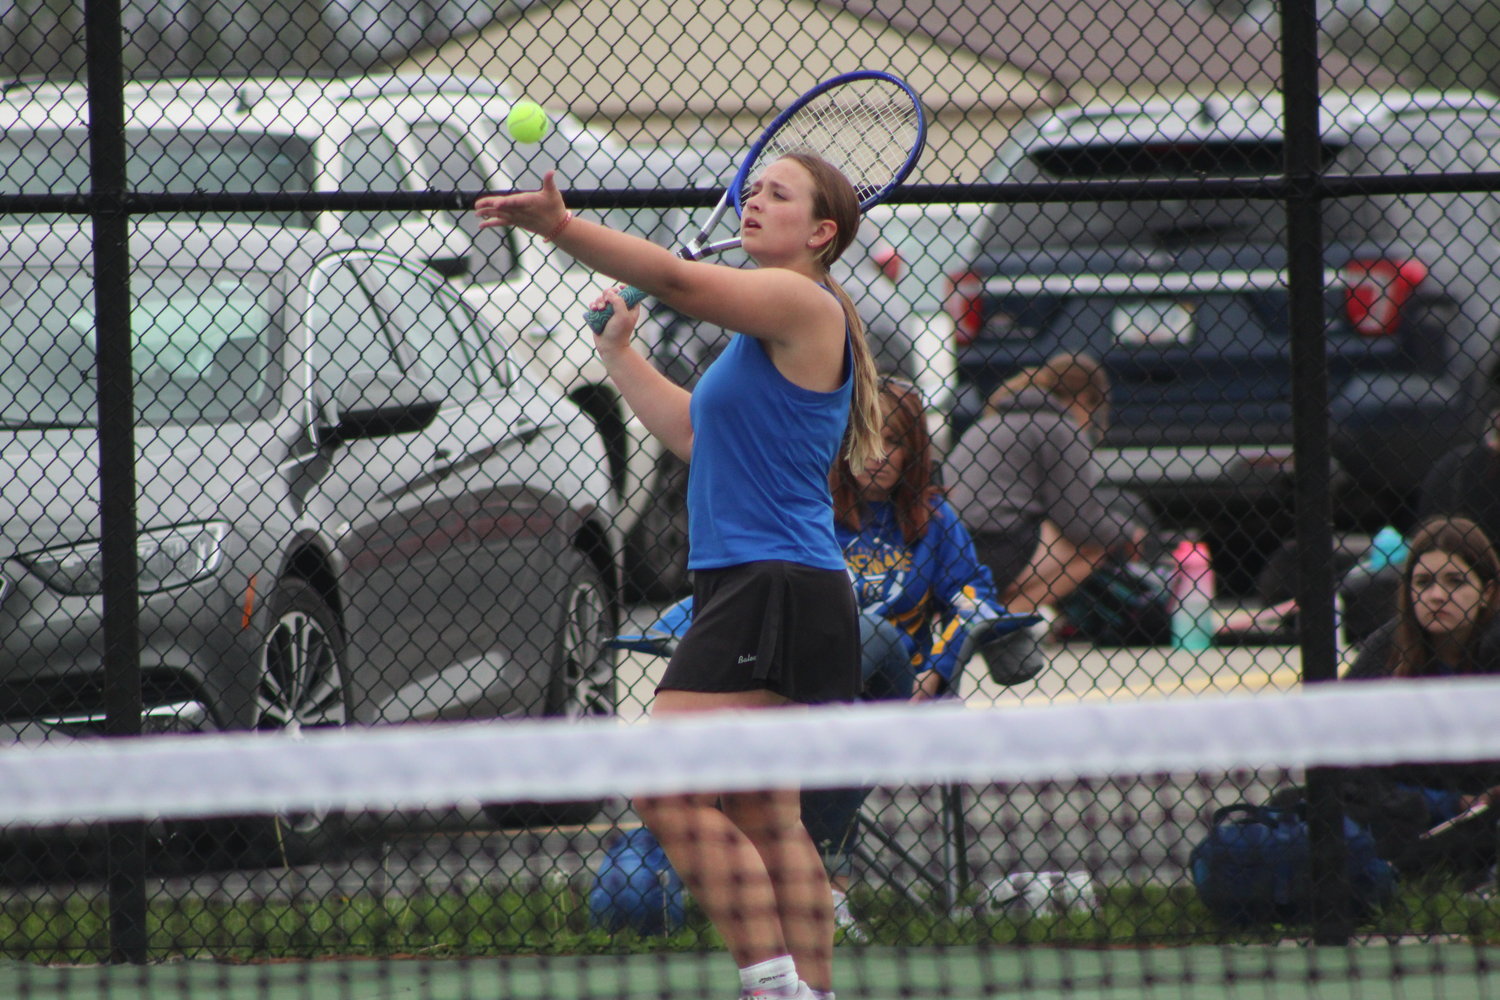 Samantha Rohr ran into a tough one singles opponent in Lillie Fishero